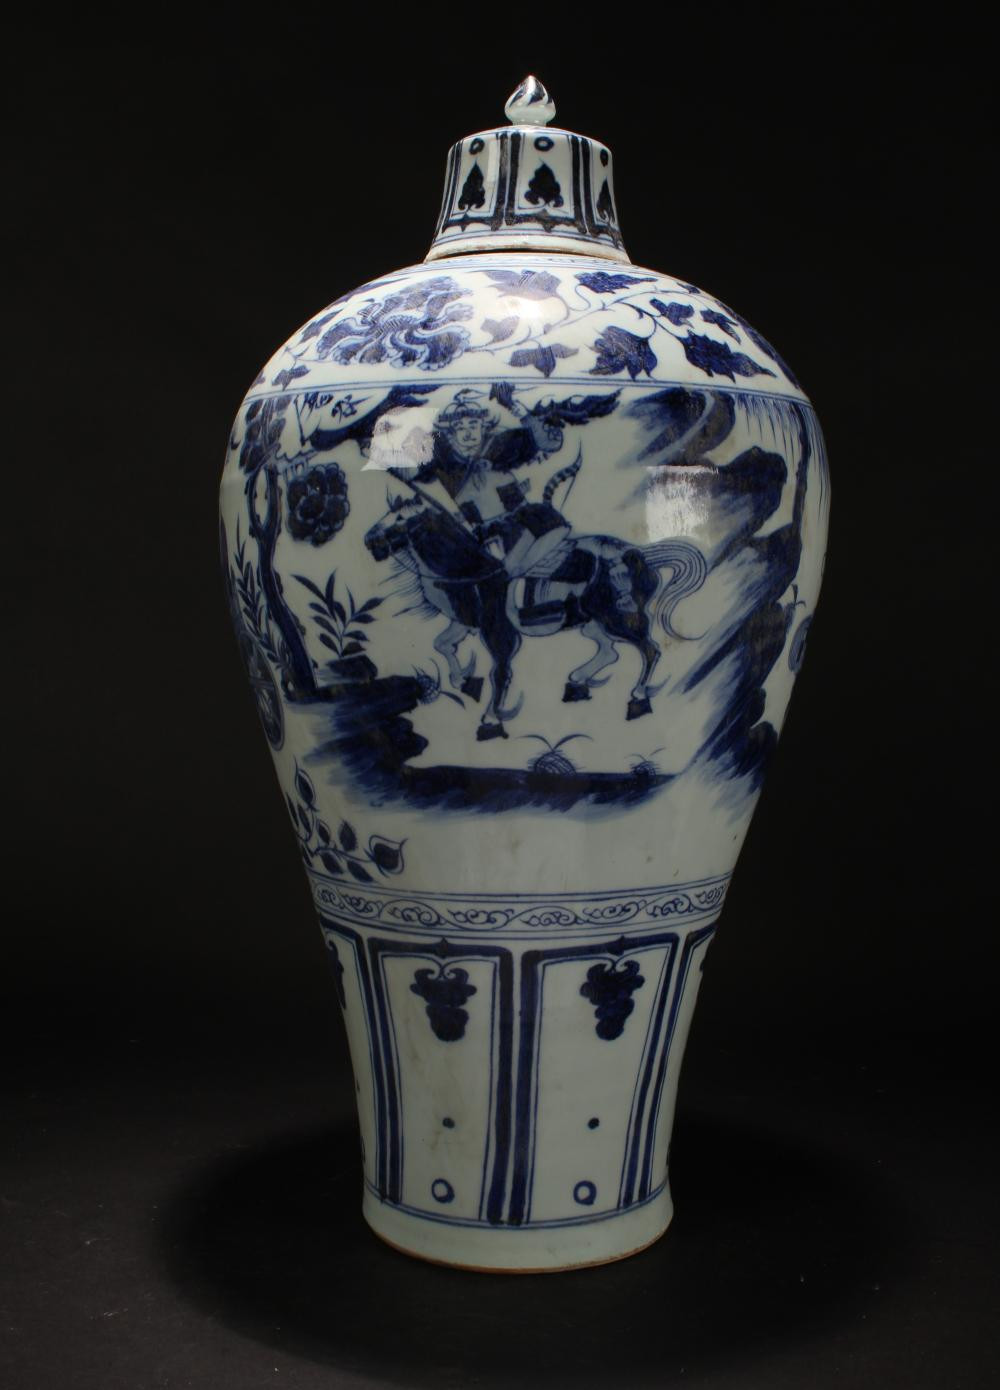 20 Wonderful White Cinnabar Vase 2024 free download white cinnabar vase of chinese porcelain vases for sale at online auction modern in a chinese story telling blue and white porcelain vase display